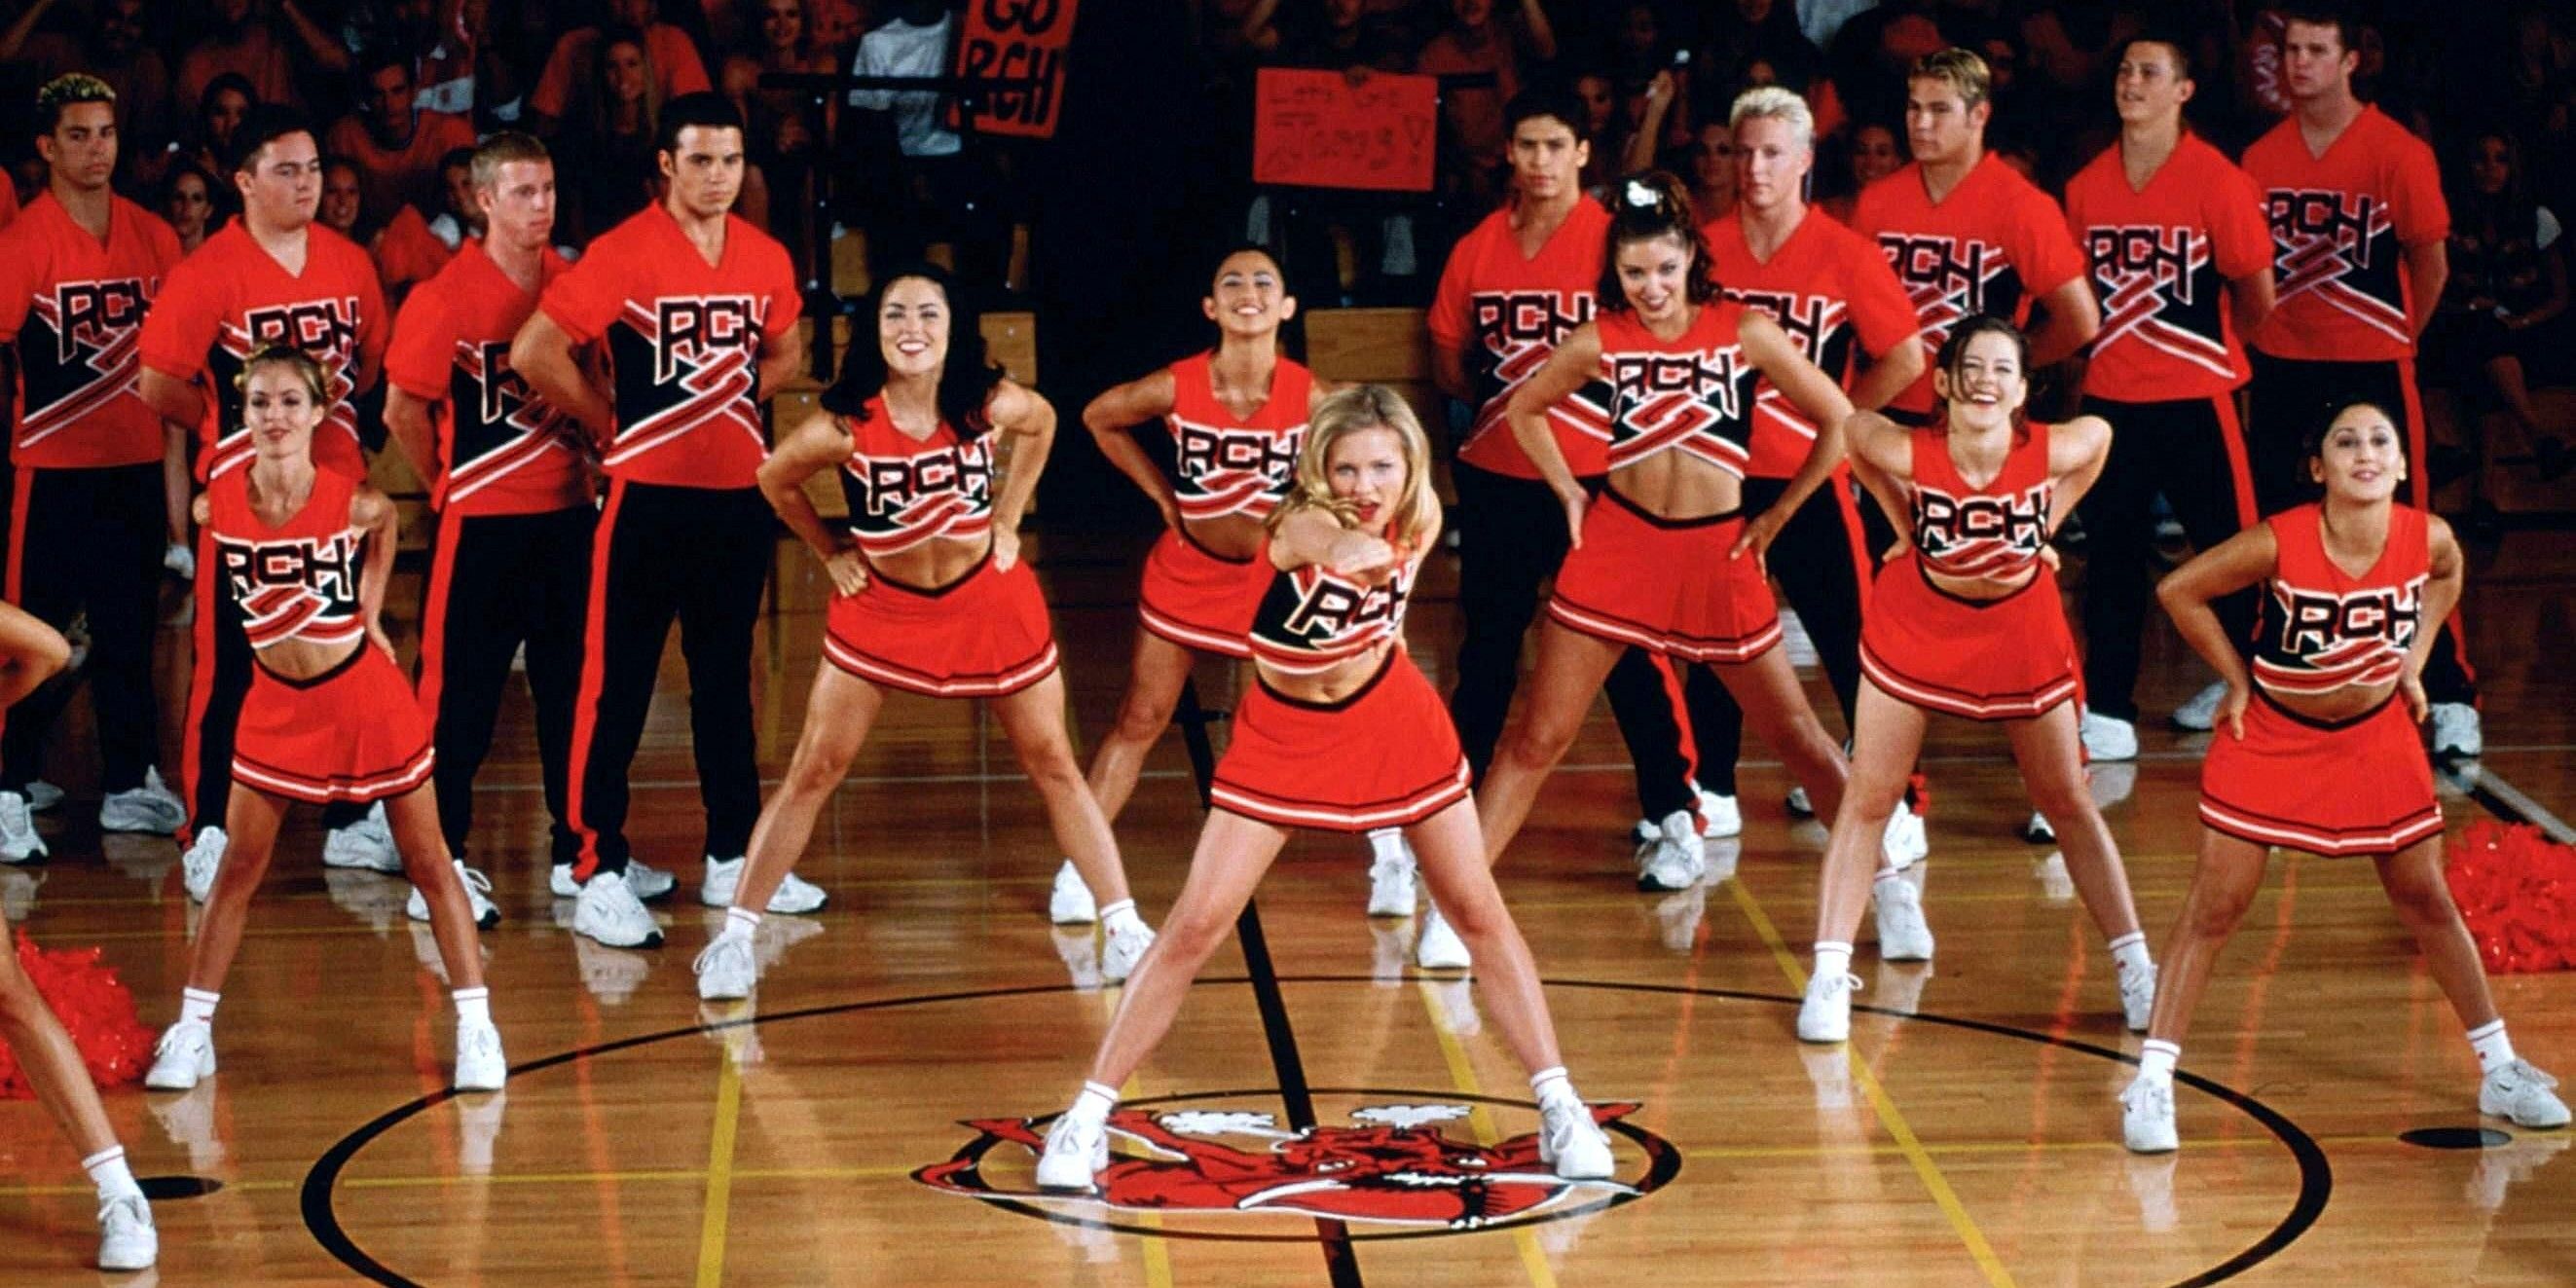 The Rancho Carne Toros in Bring It On